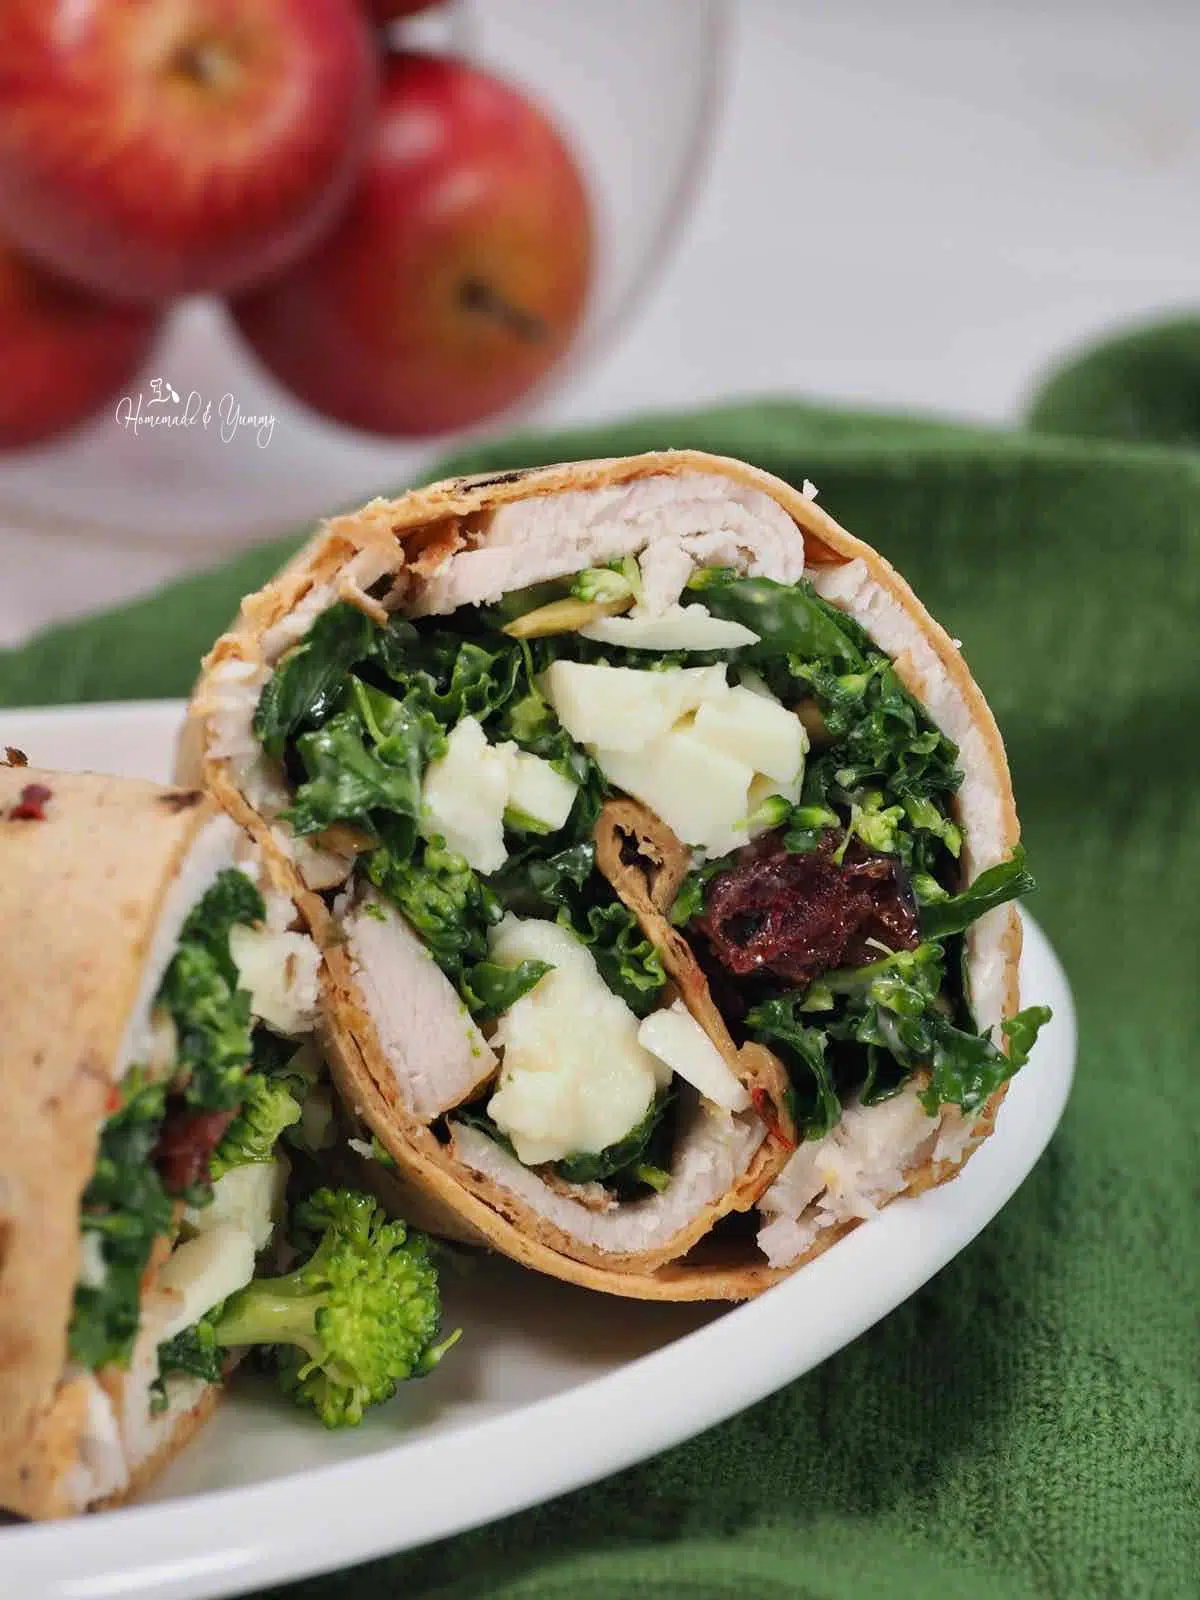 Harvest Turkey Wrap made with cheese curds.